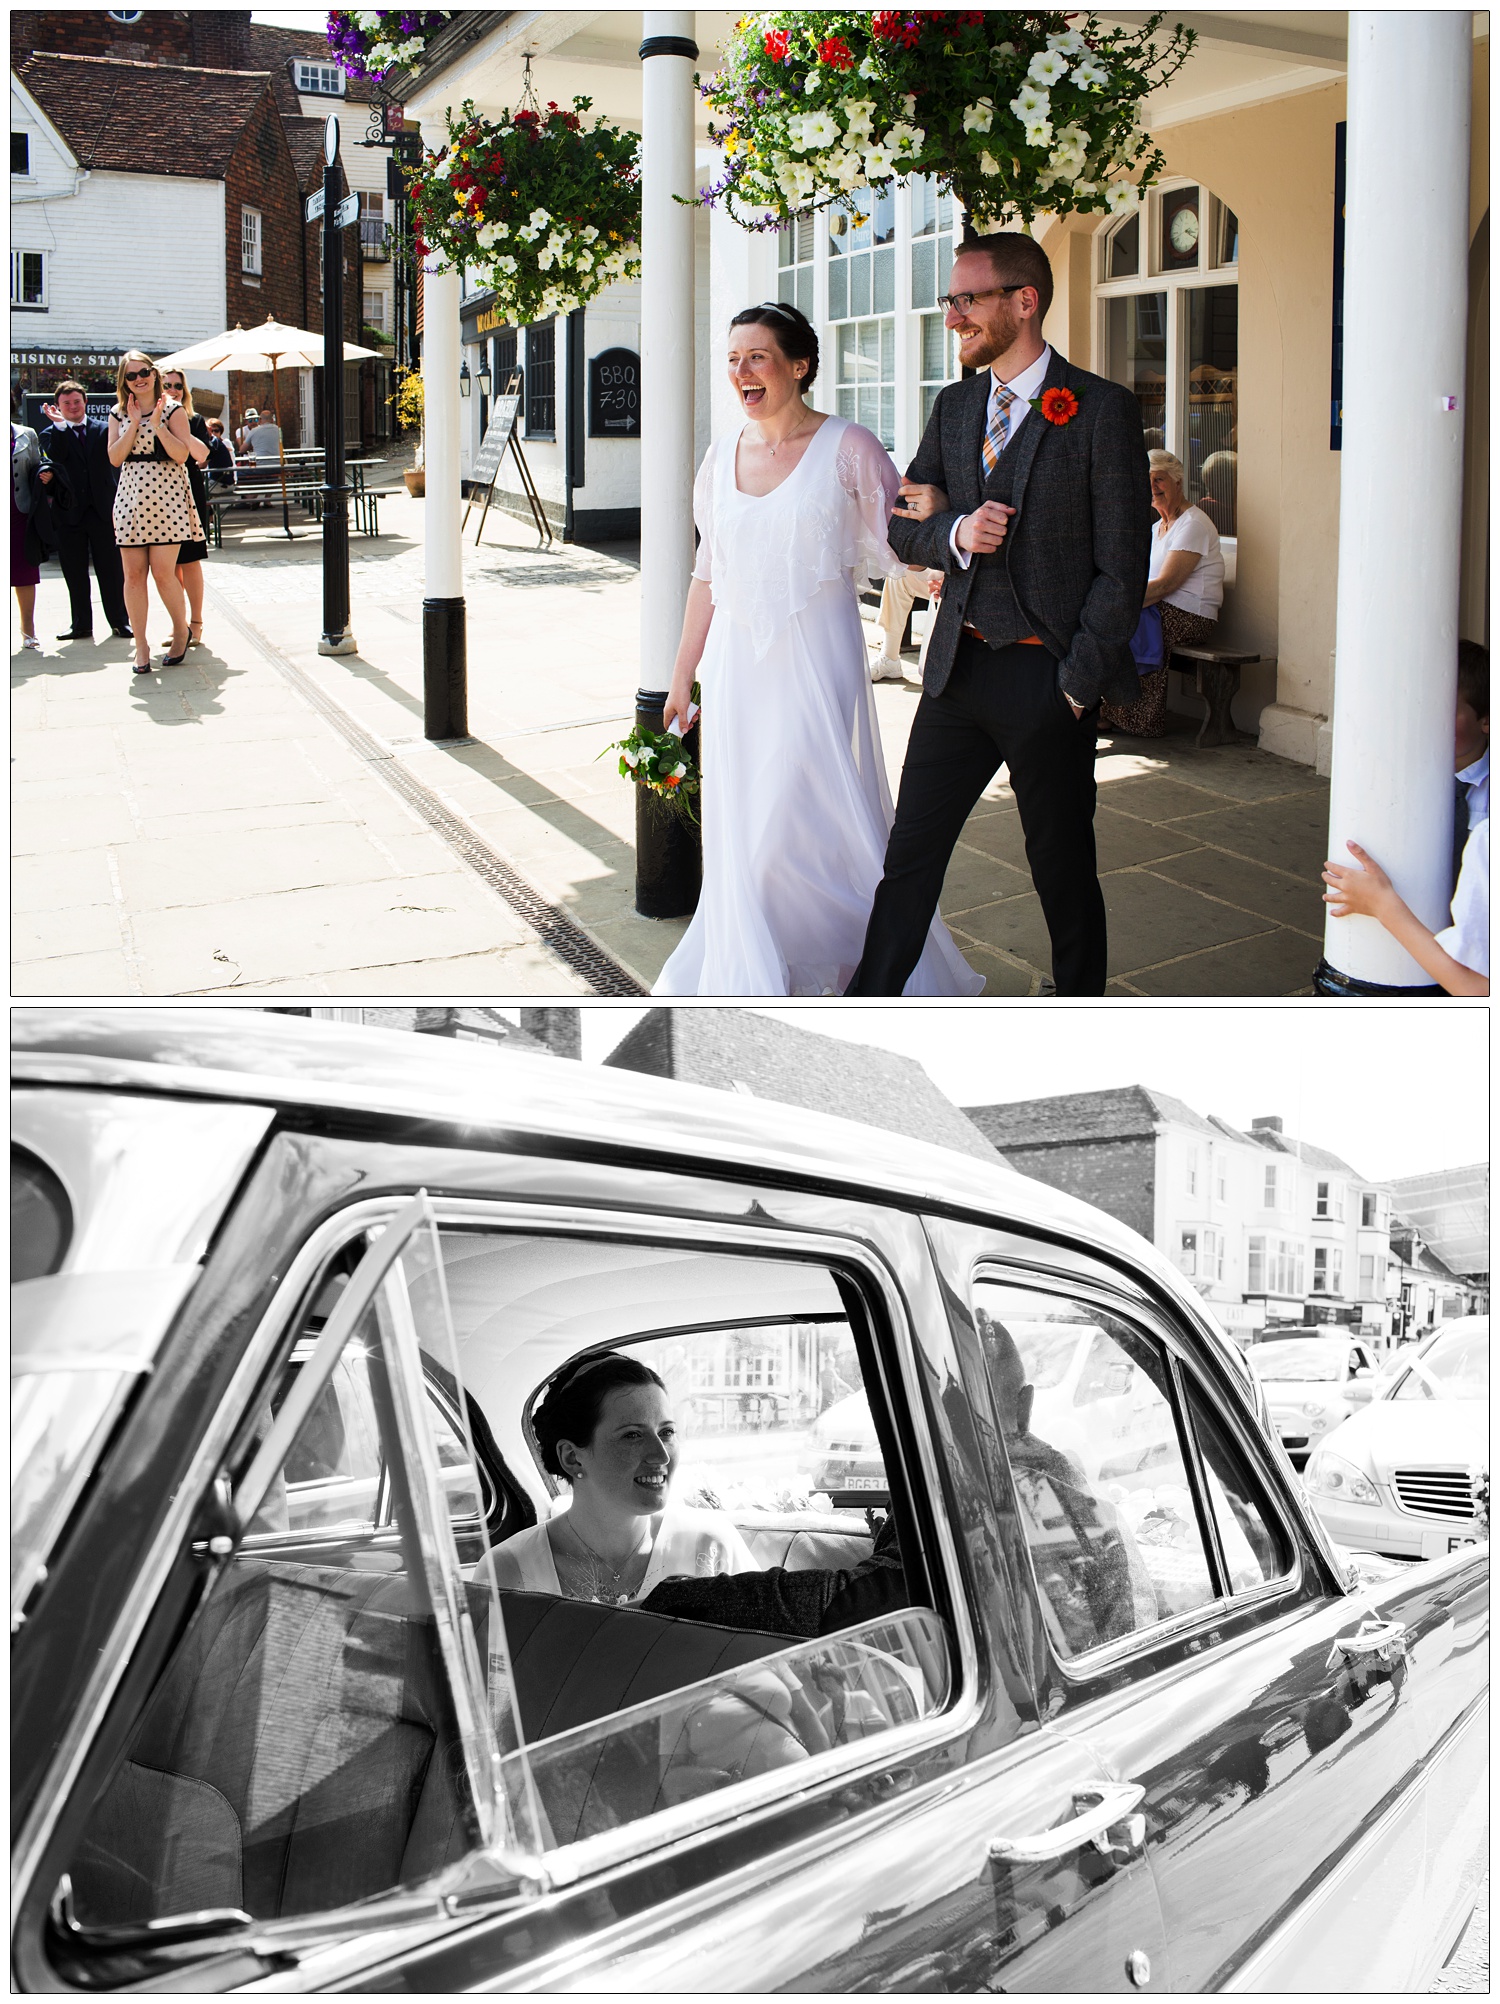 Couple leaving the Tenterden Town Hall after their wedding. The bride sits in the car with her husband.